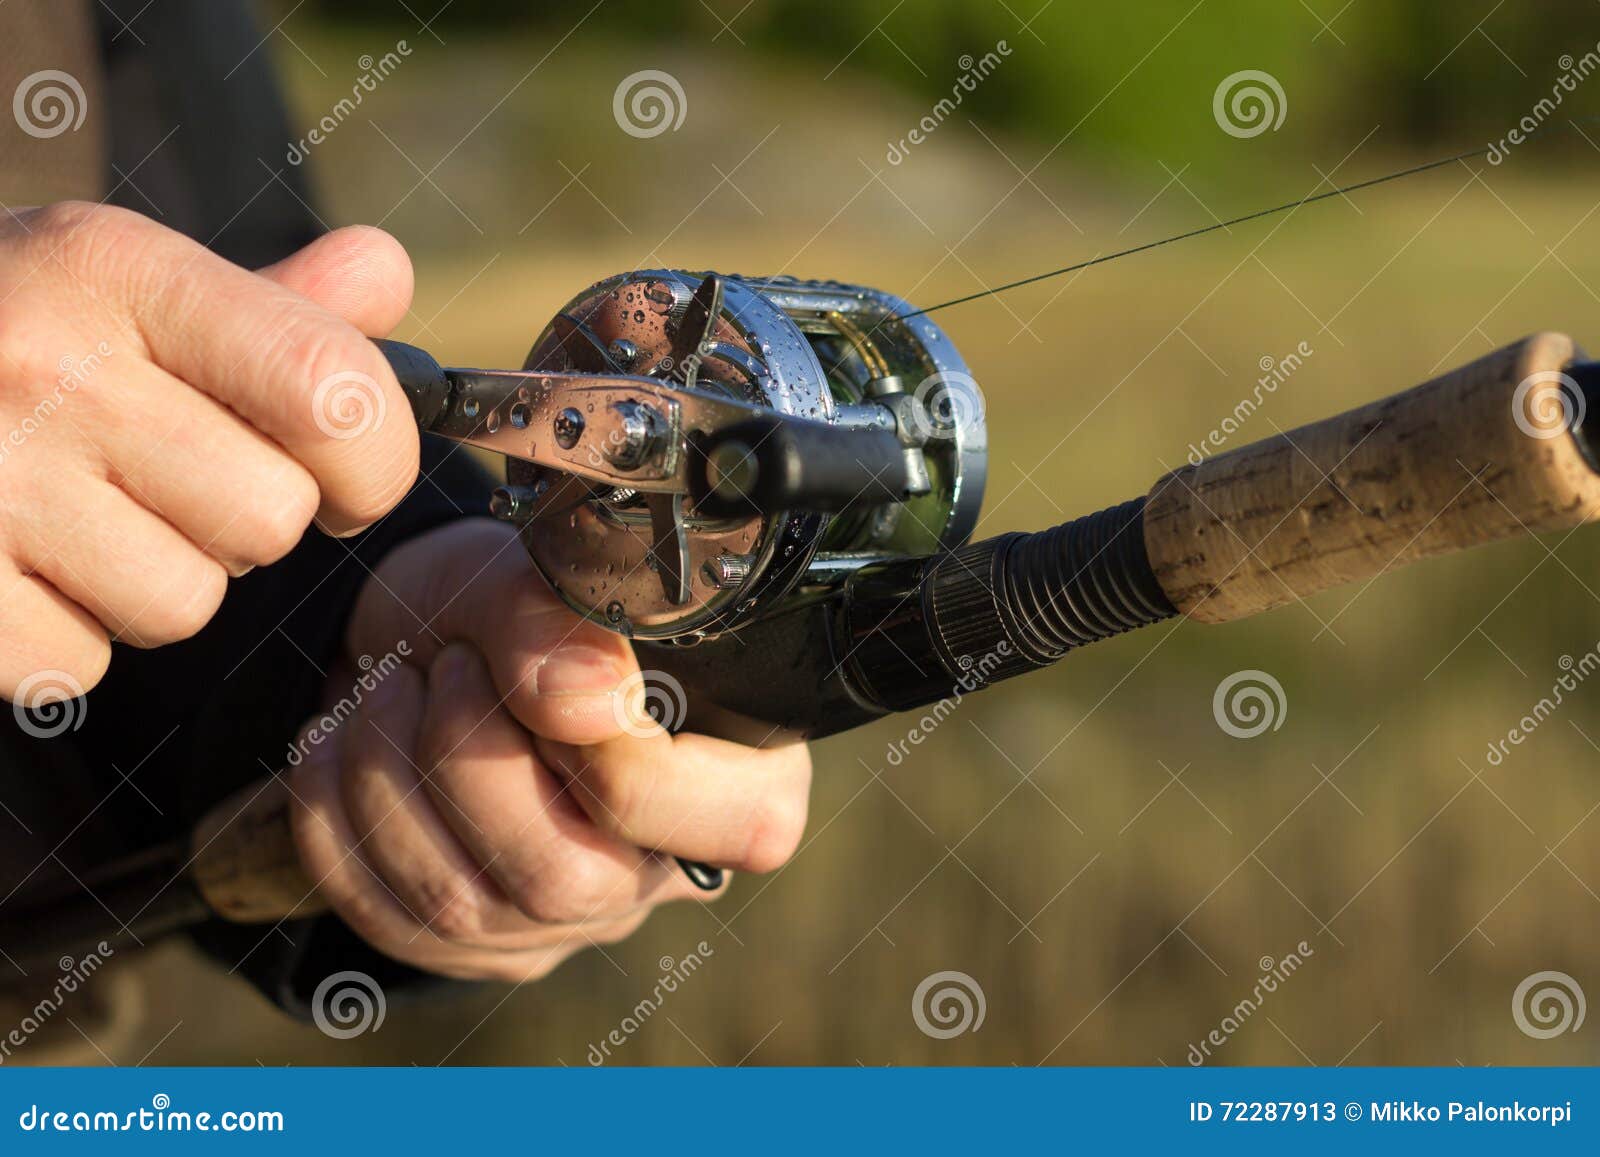 https://thumbs.dreamstime.com/z/man-fishing-round-reel-rod-one-hand-crank-reeling-line-to-other-hand-holding-72287913.jpg